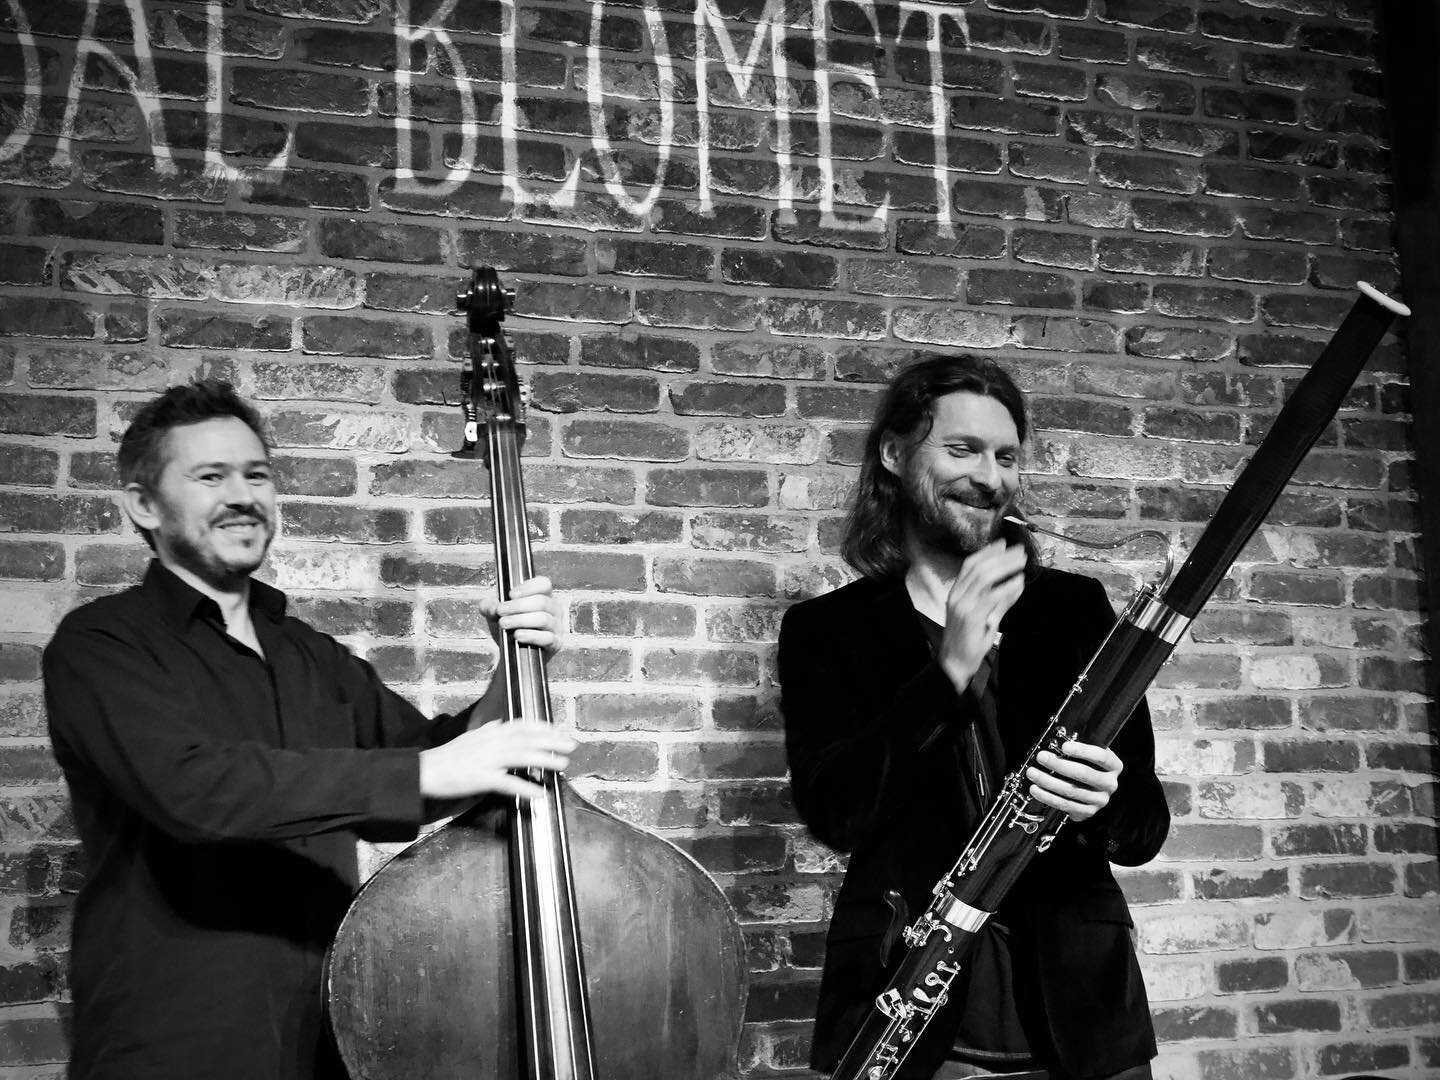 @matbasslopez and Marc Tr&eacute;nel graciously taking the applause in front of the brick wall at @lebalblomet during the concert of the @off_swing_quintet 

#doublebass #bassoon #orchestredeparis #parislife #contrebasse #basson @label_ouest @jazz.ma